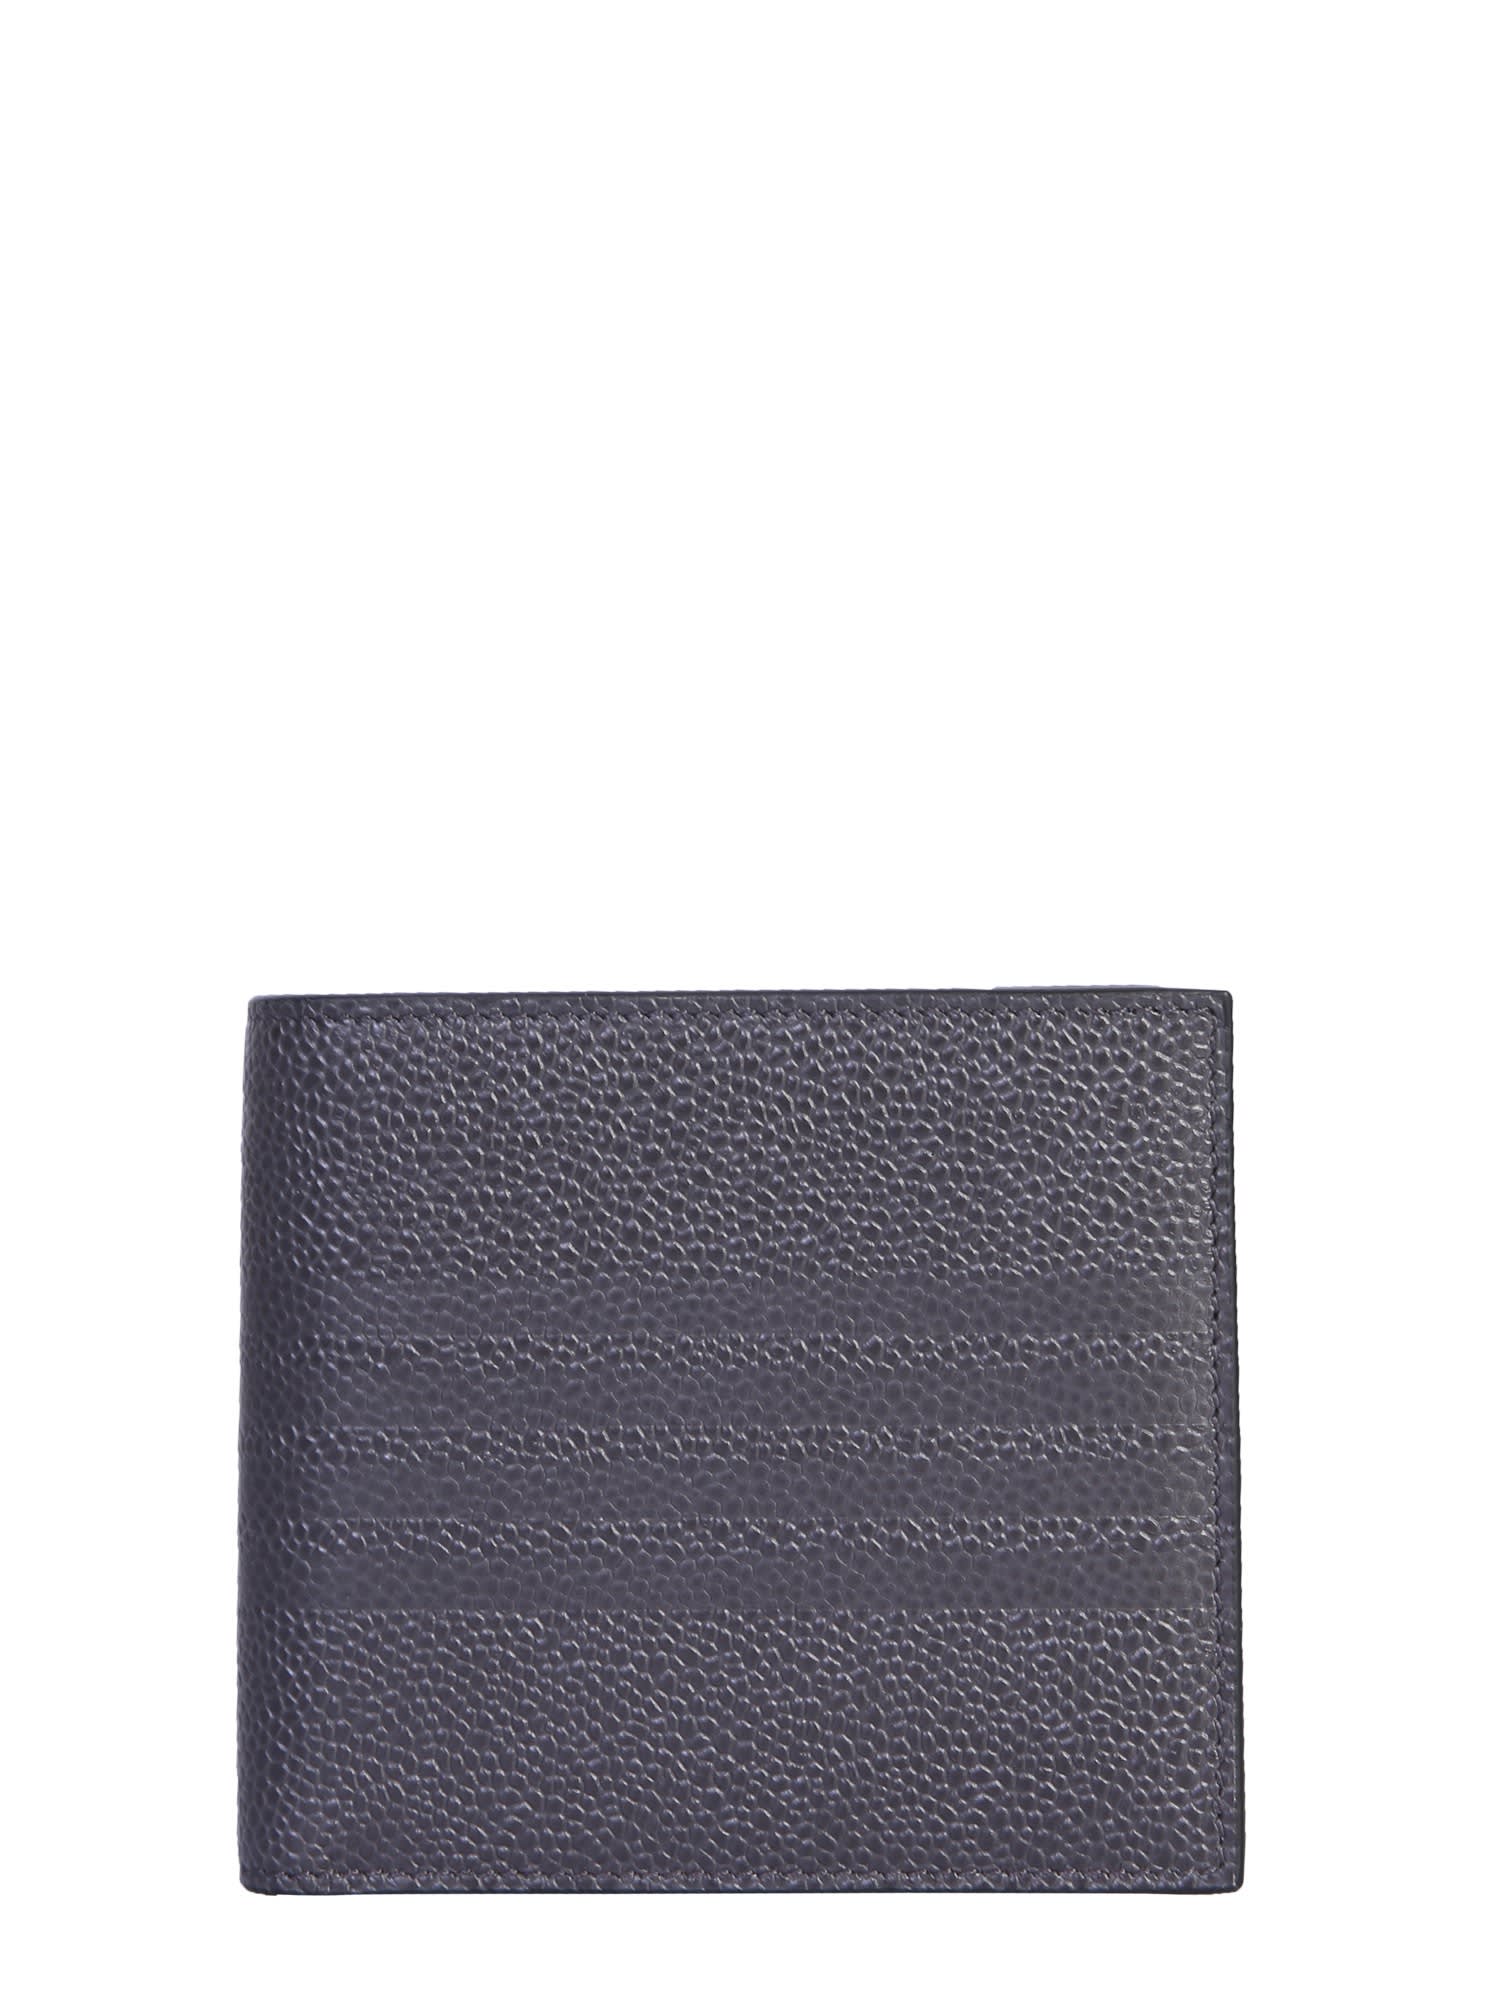 THOM BROWNE BILLFOLD WALLET WITH LOGO,11210198